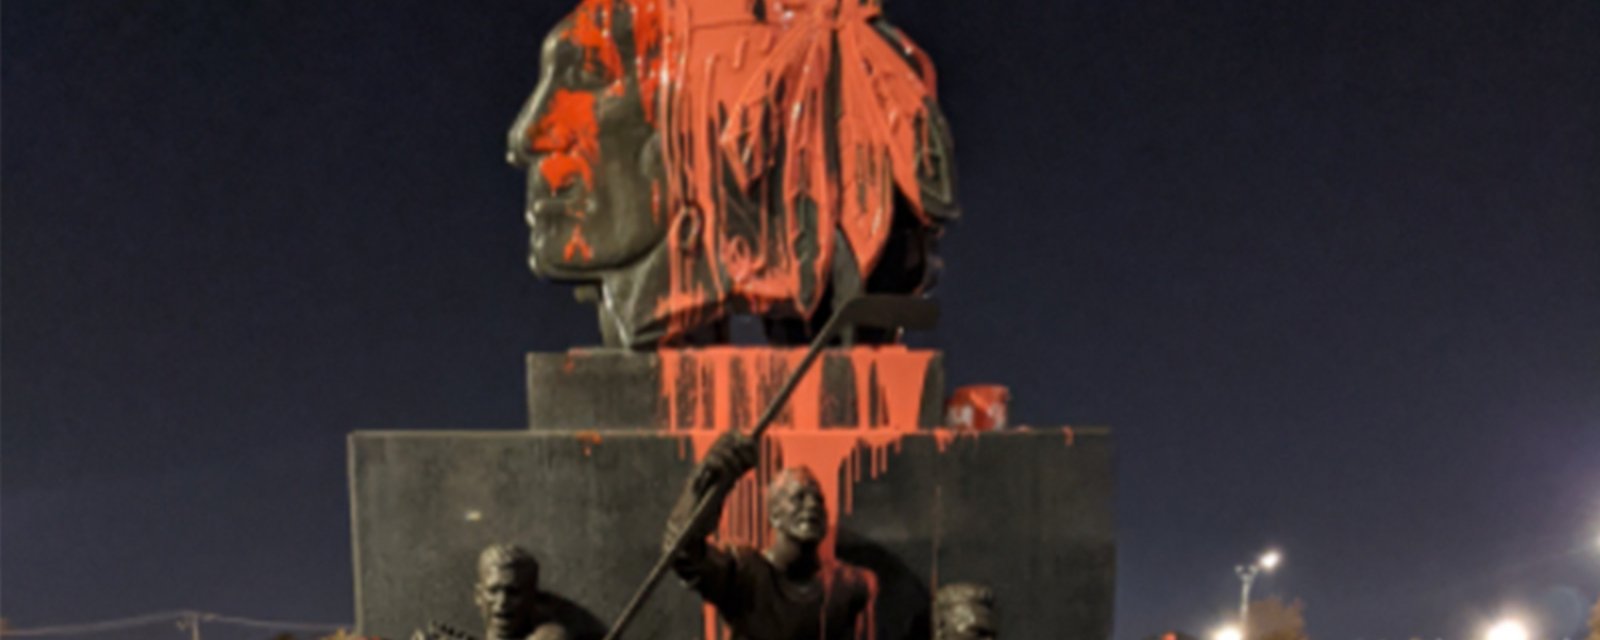 Blackhawks logo statue defaced and graffitied by political activists